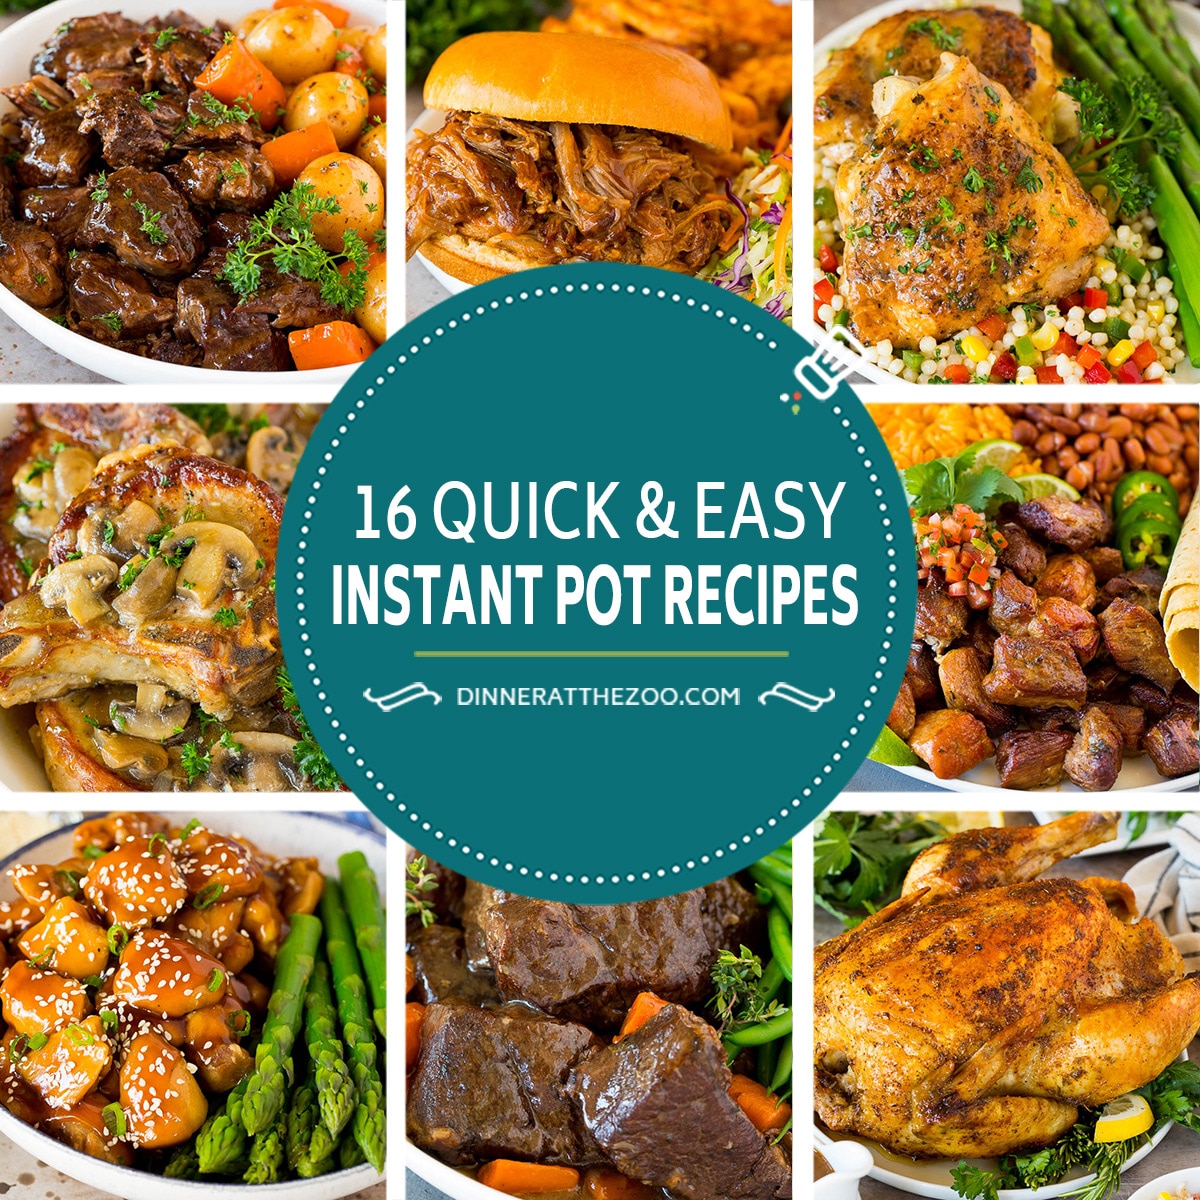 A group of quick and easy Instant Pot recipes for any occasion like pot roast, pork chops and chicken thighs.